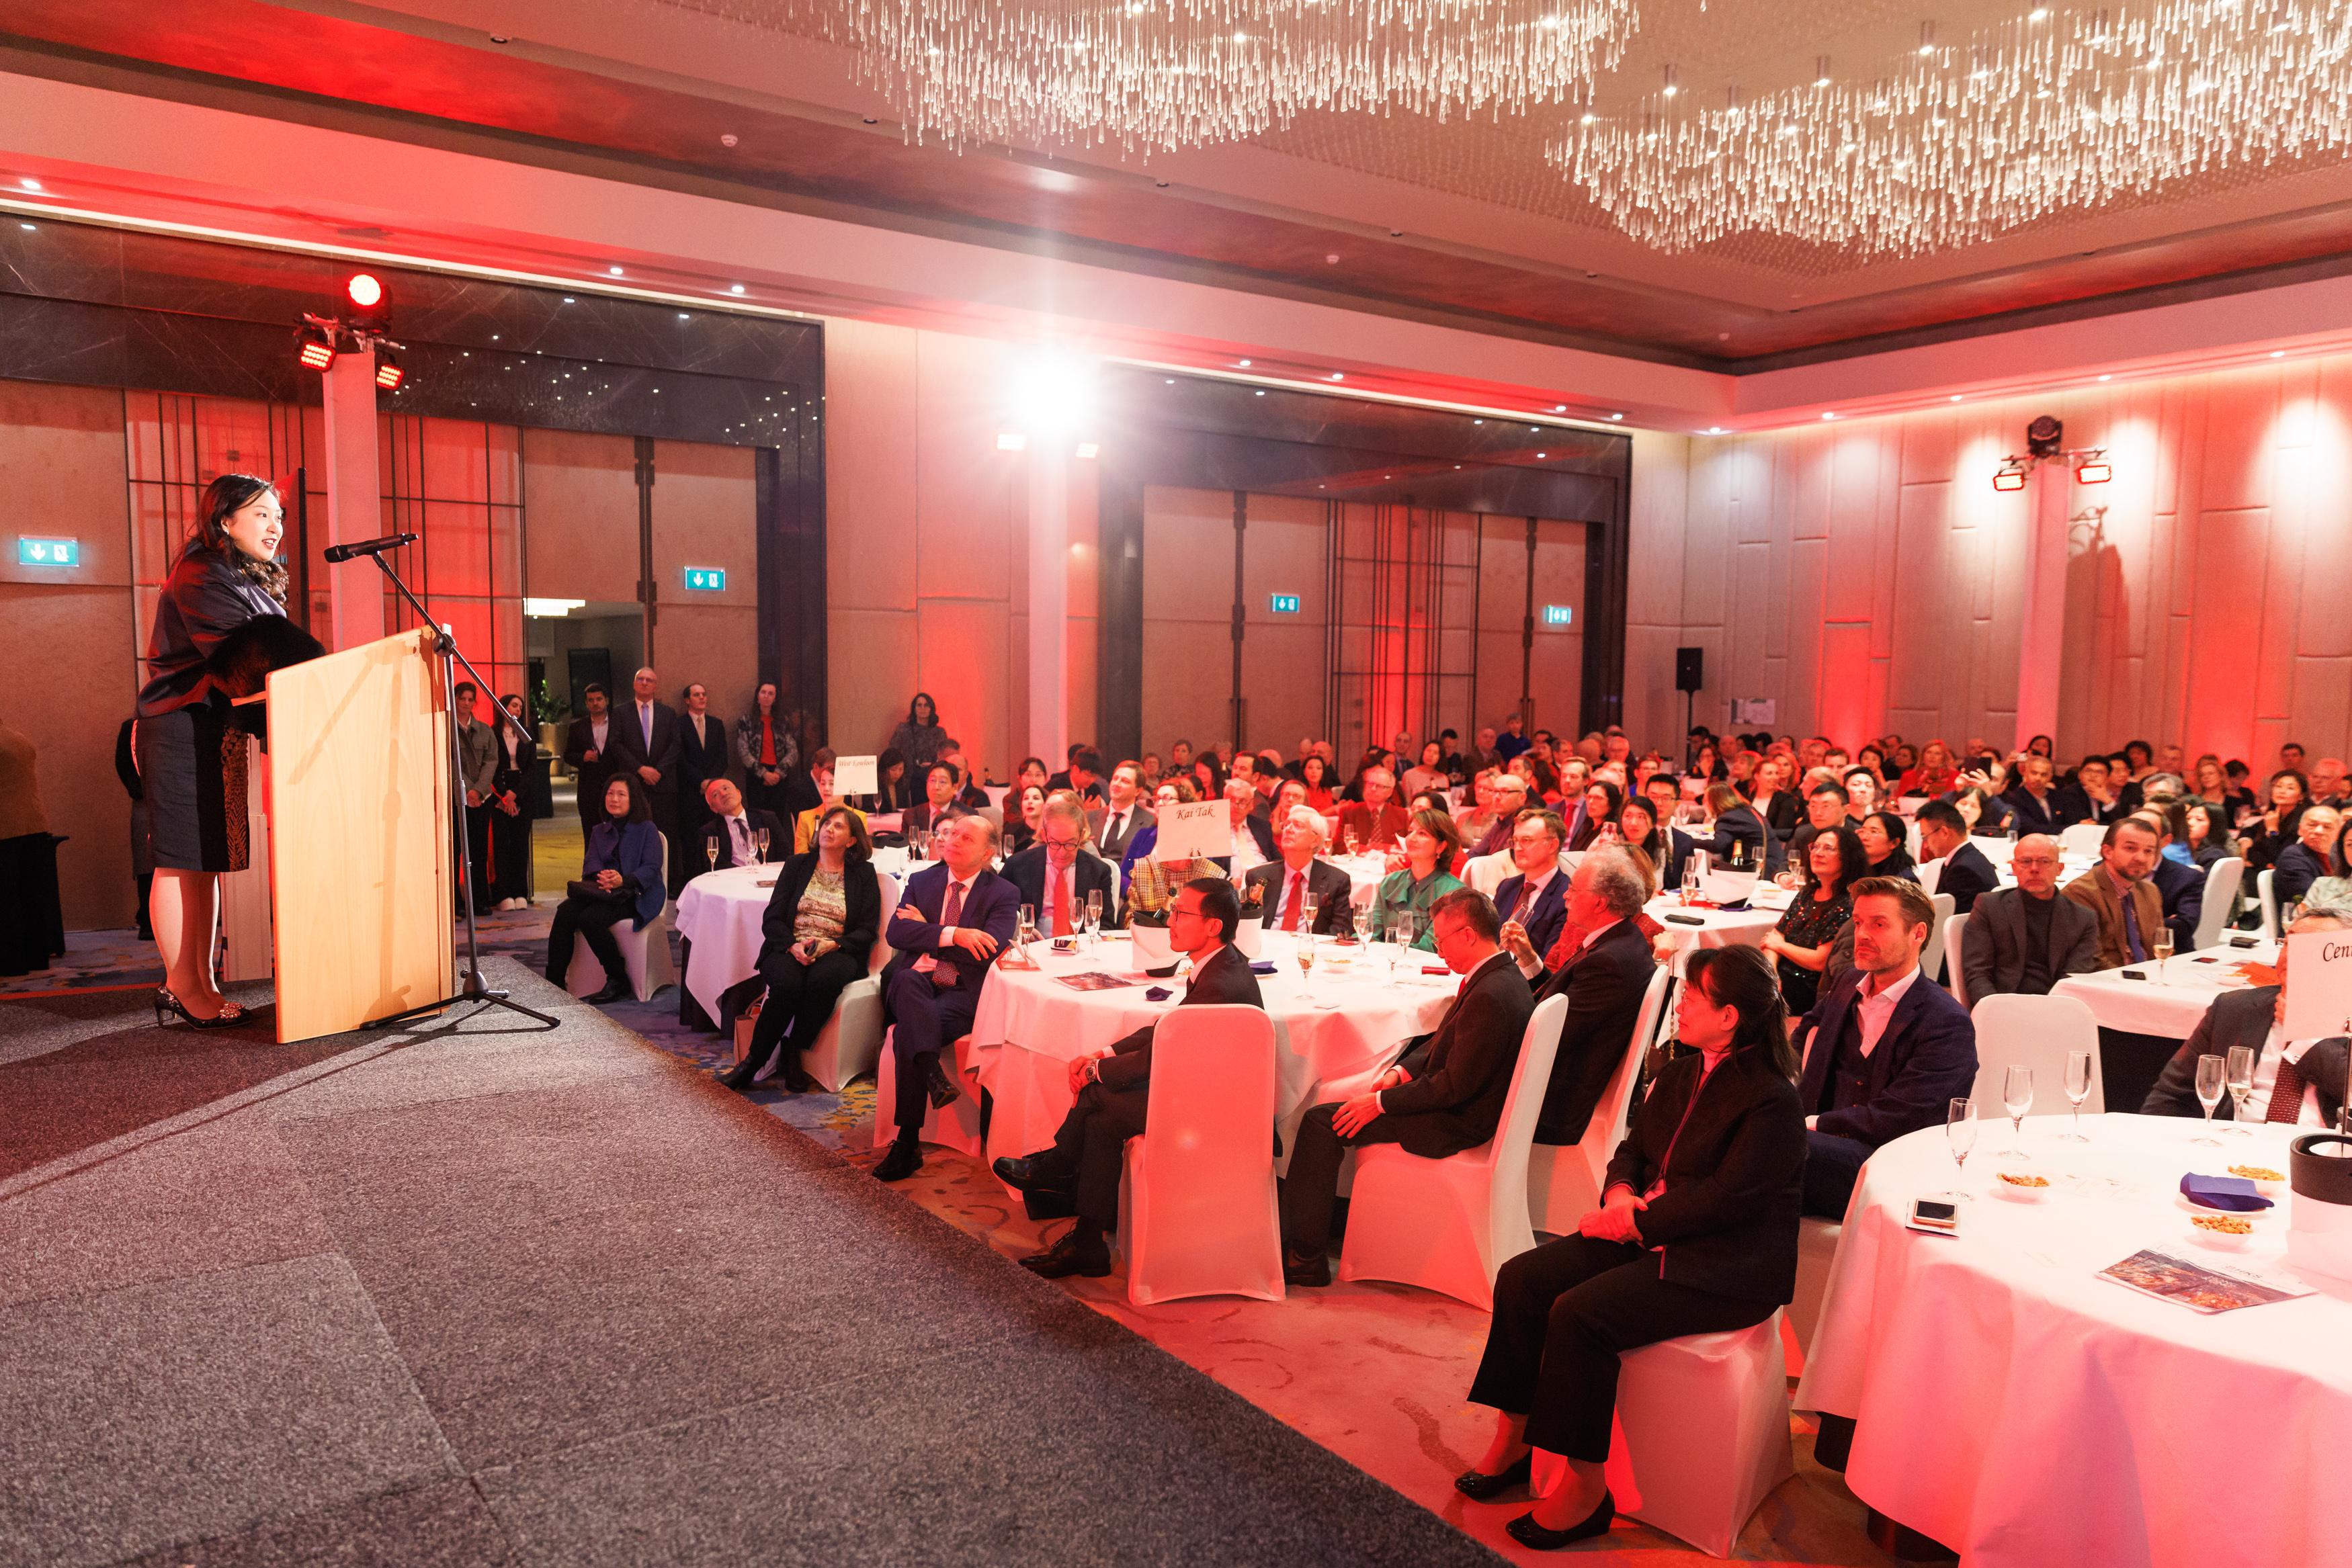 The Acting Special Representative for Hong Kong Economic and Trade Affairs to the European Union, Miss Grace Li, addressed over 300 guests at the Chinese New Year reception in Brussels on January 31 (Brussels time).